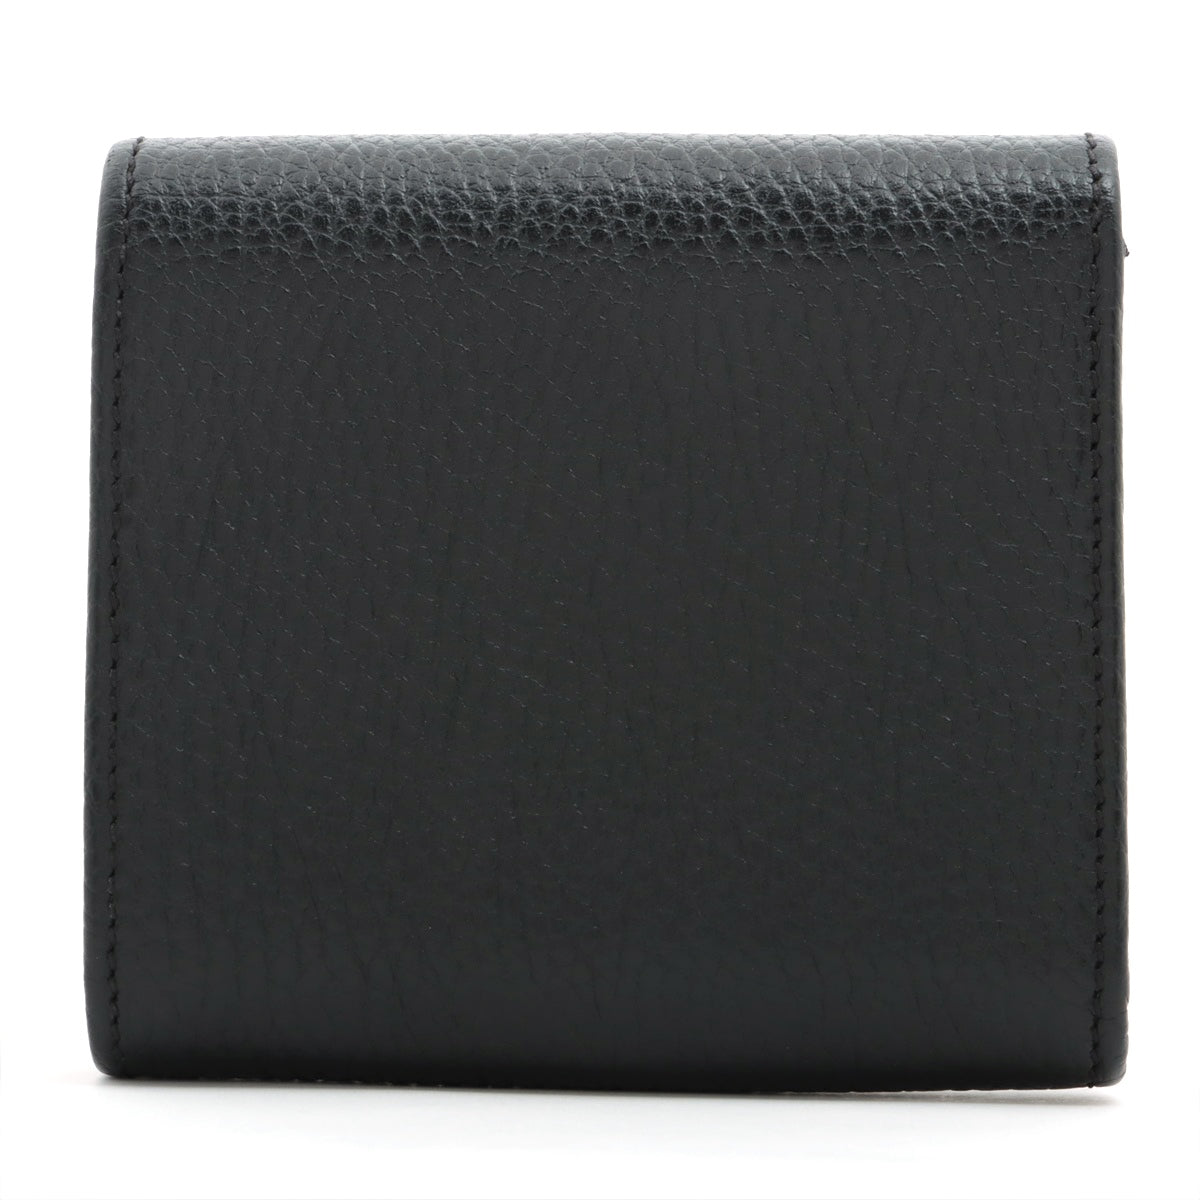 Gucci GG Marmont 598587 Leather Wallet Black